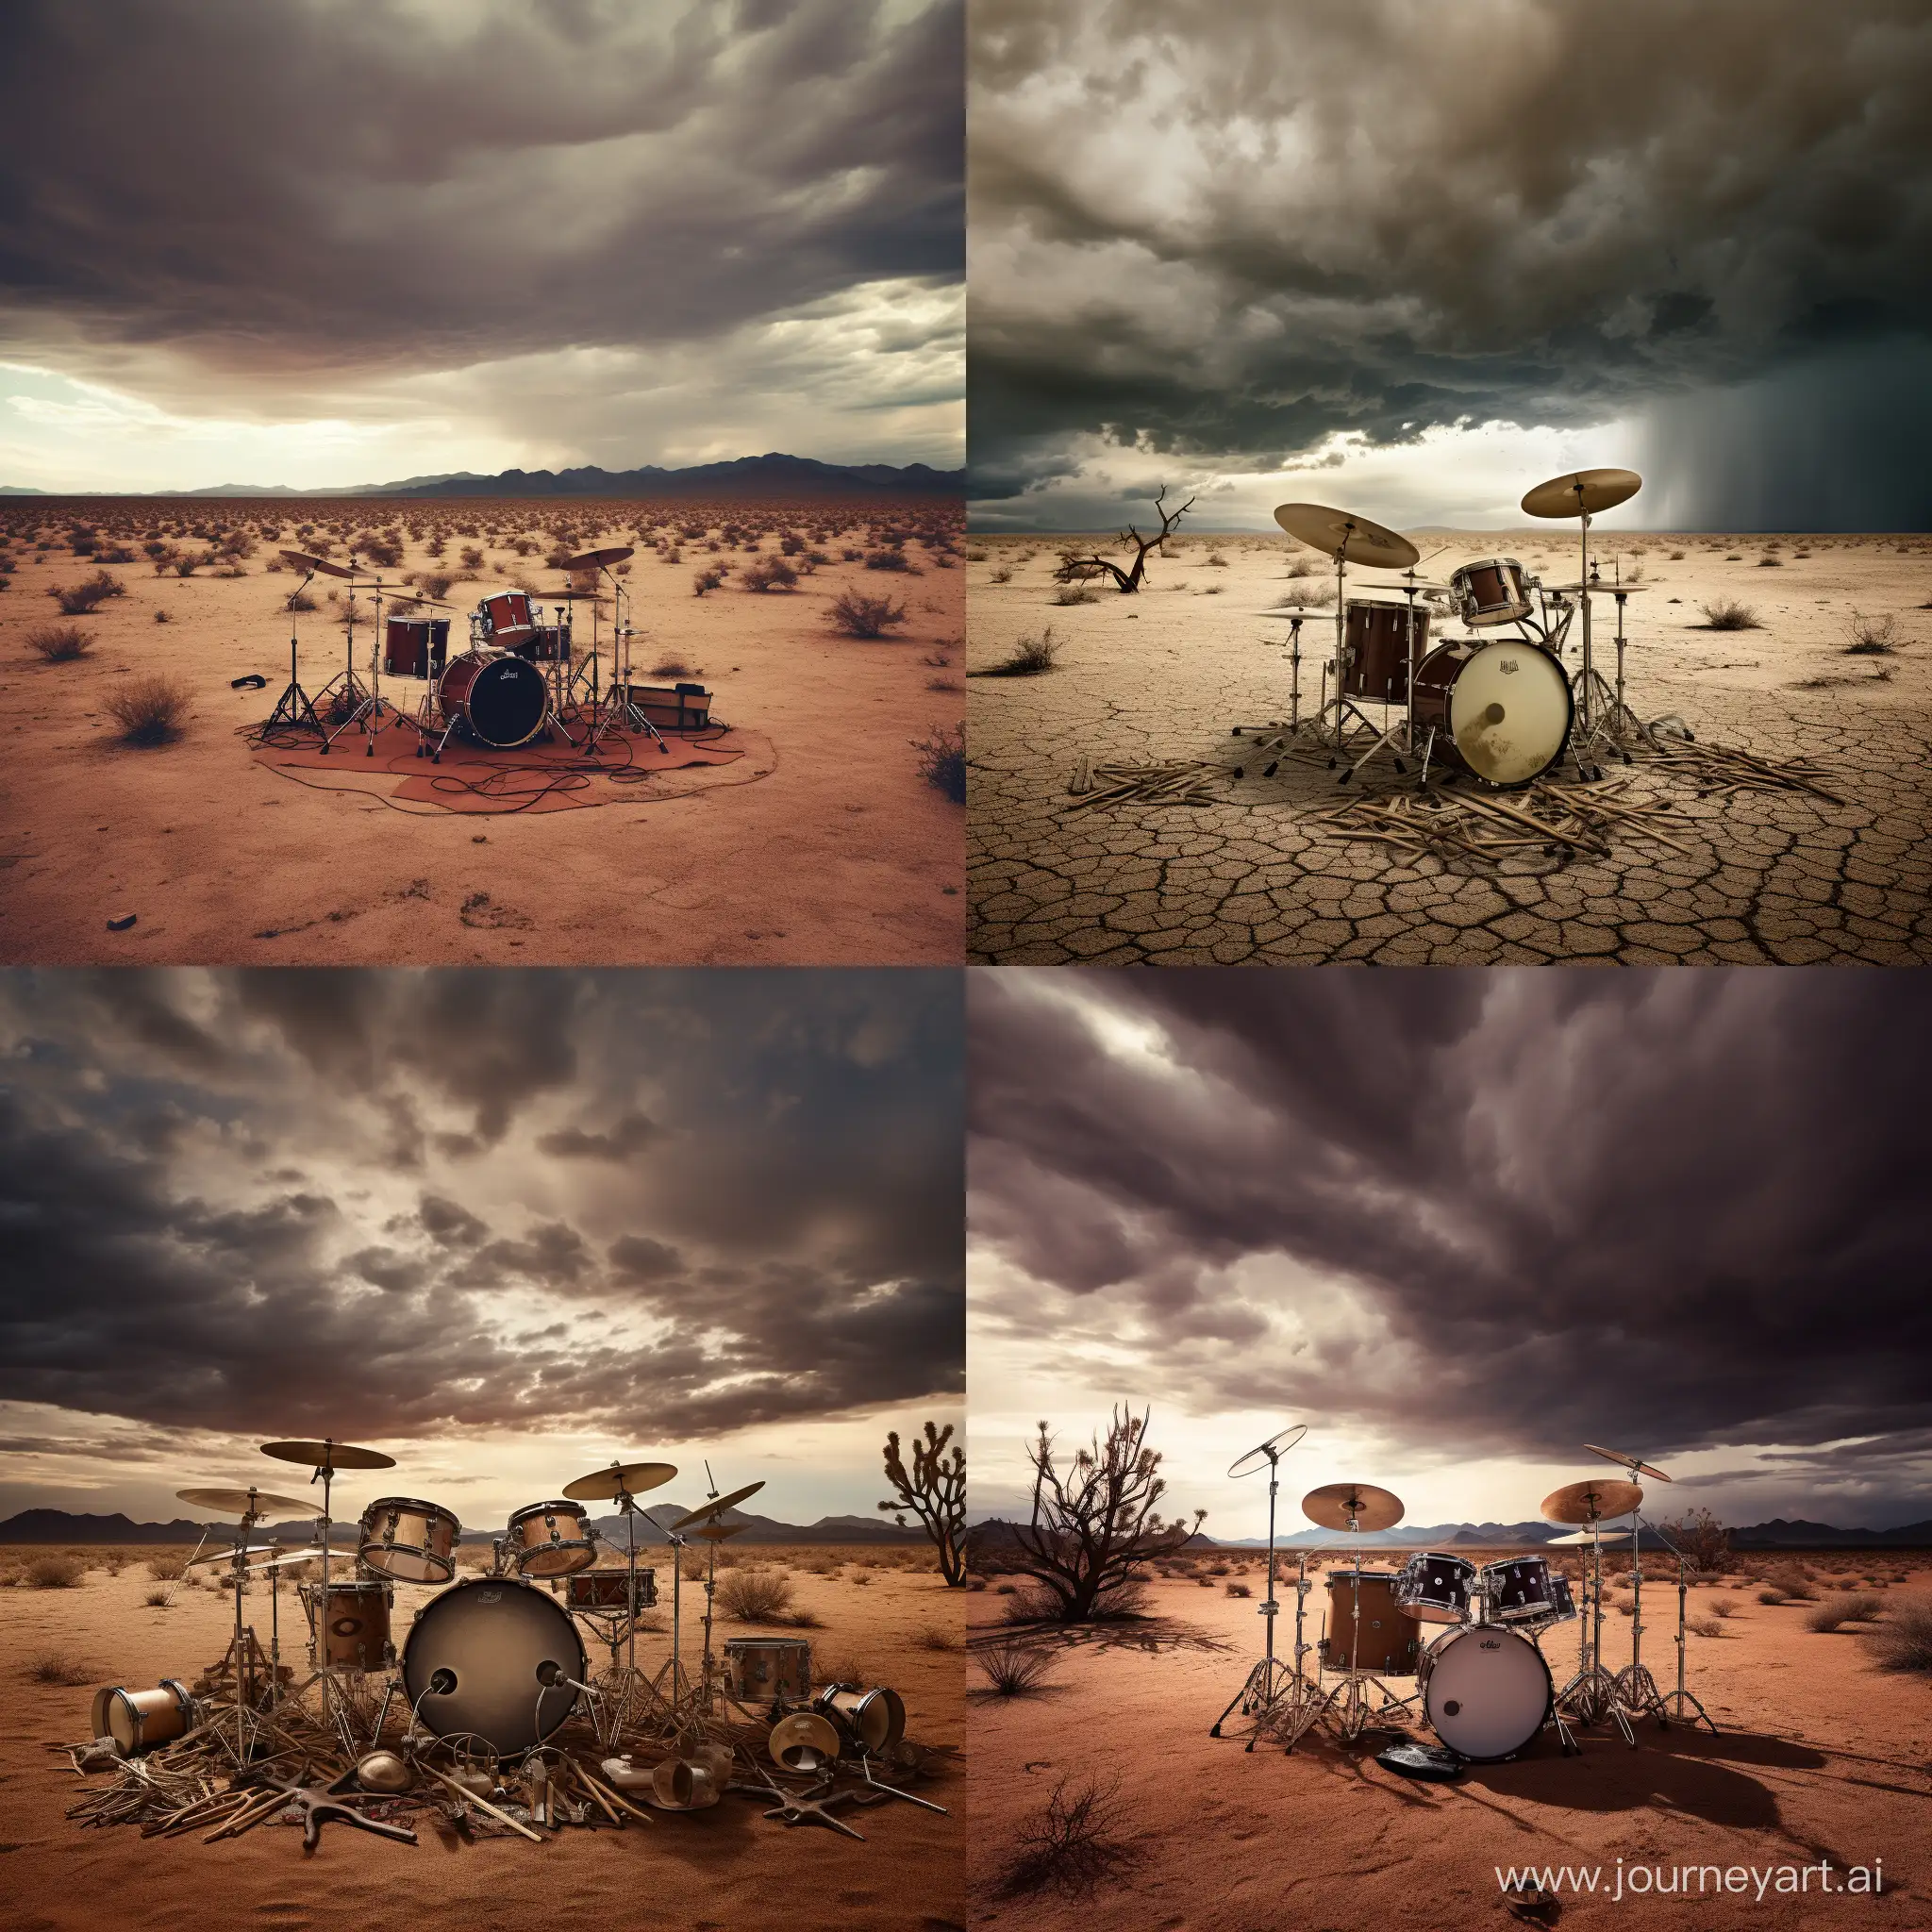 Partially buried drum kit in the desert, the sky before storm